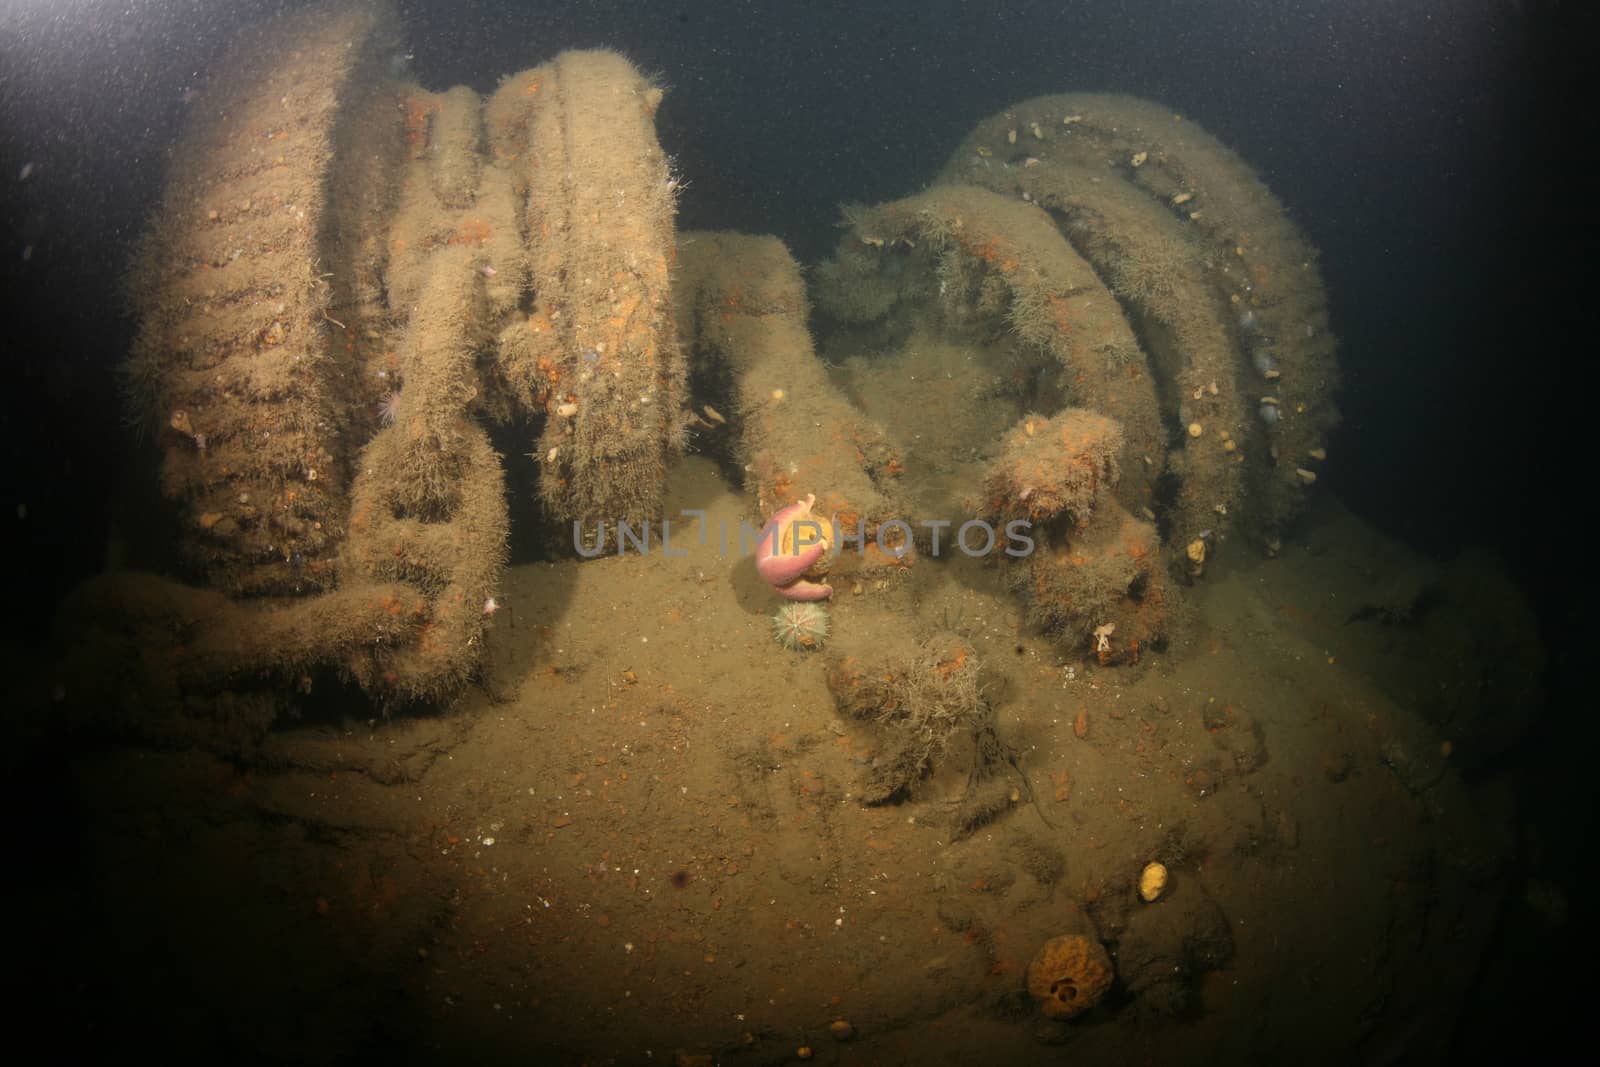 Baltic Sea underwater diving Ship Wreck photo by desant7474